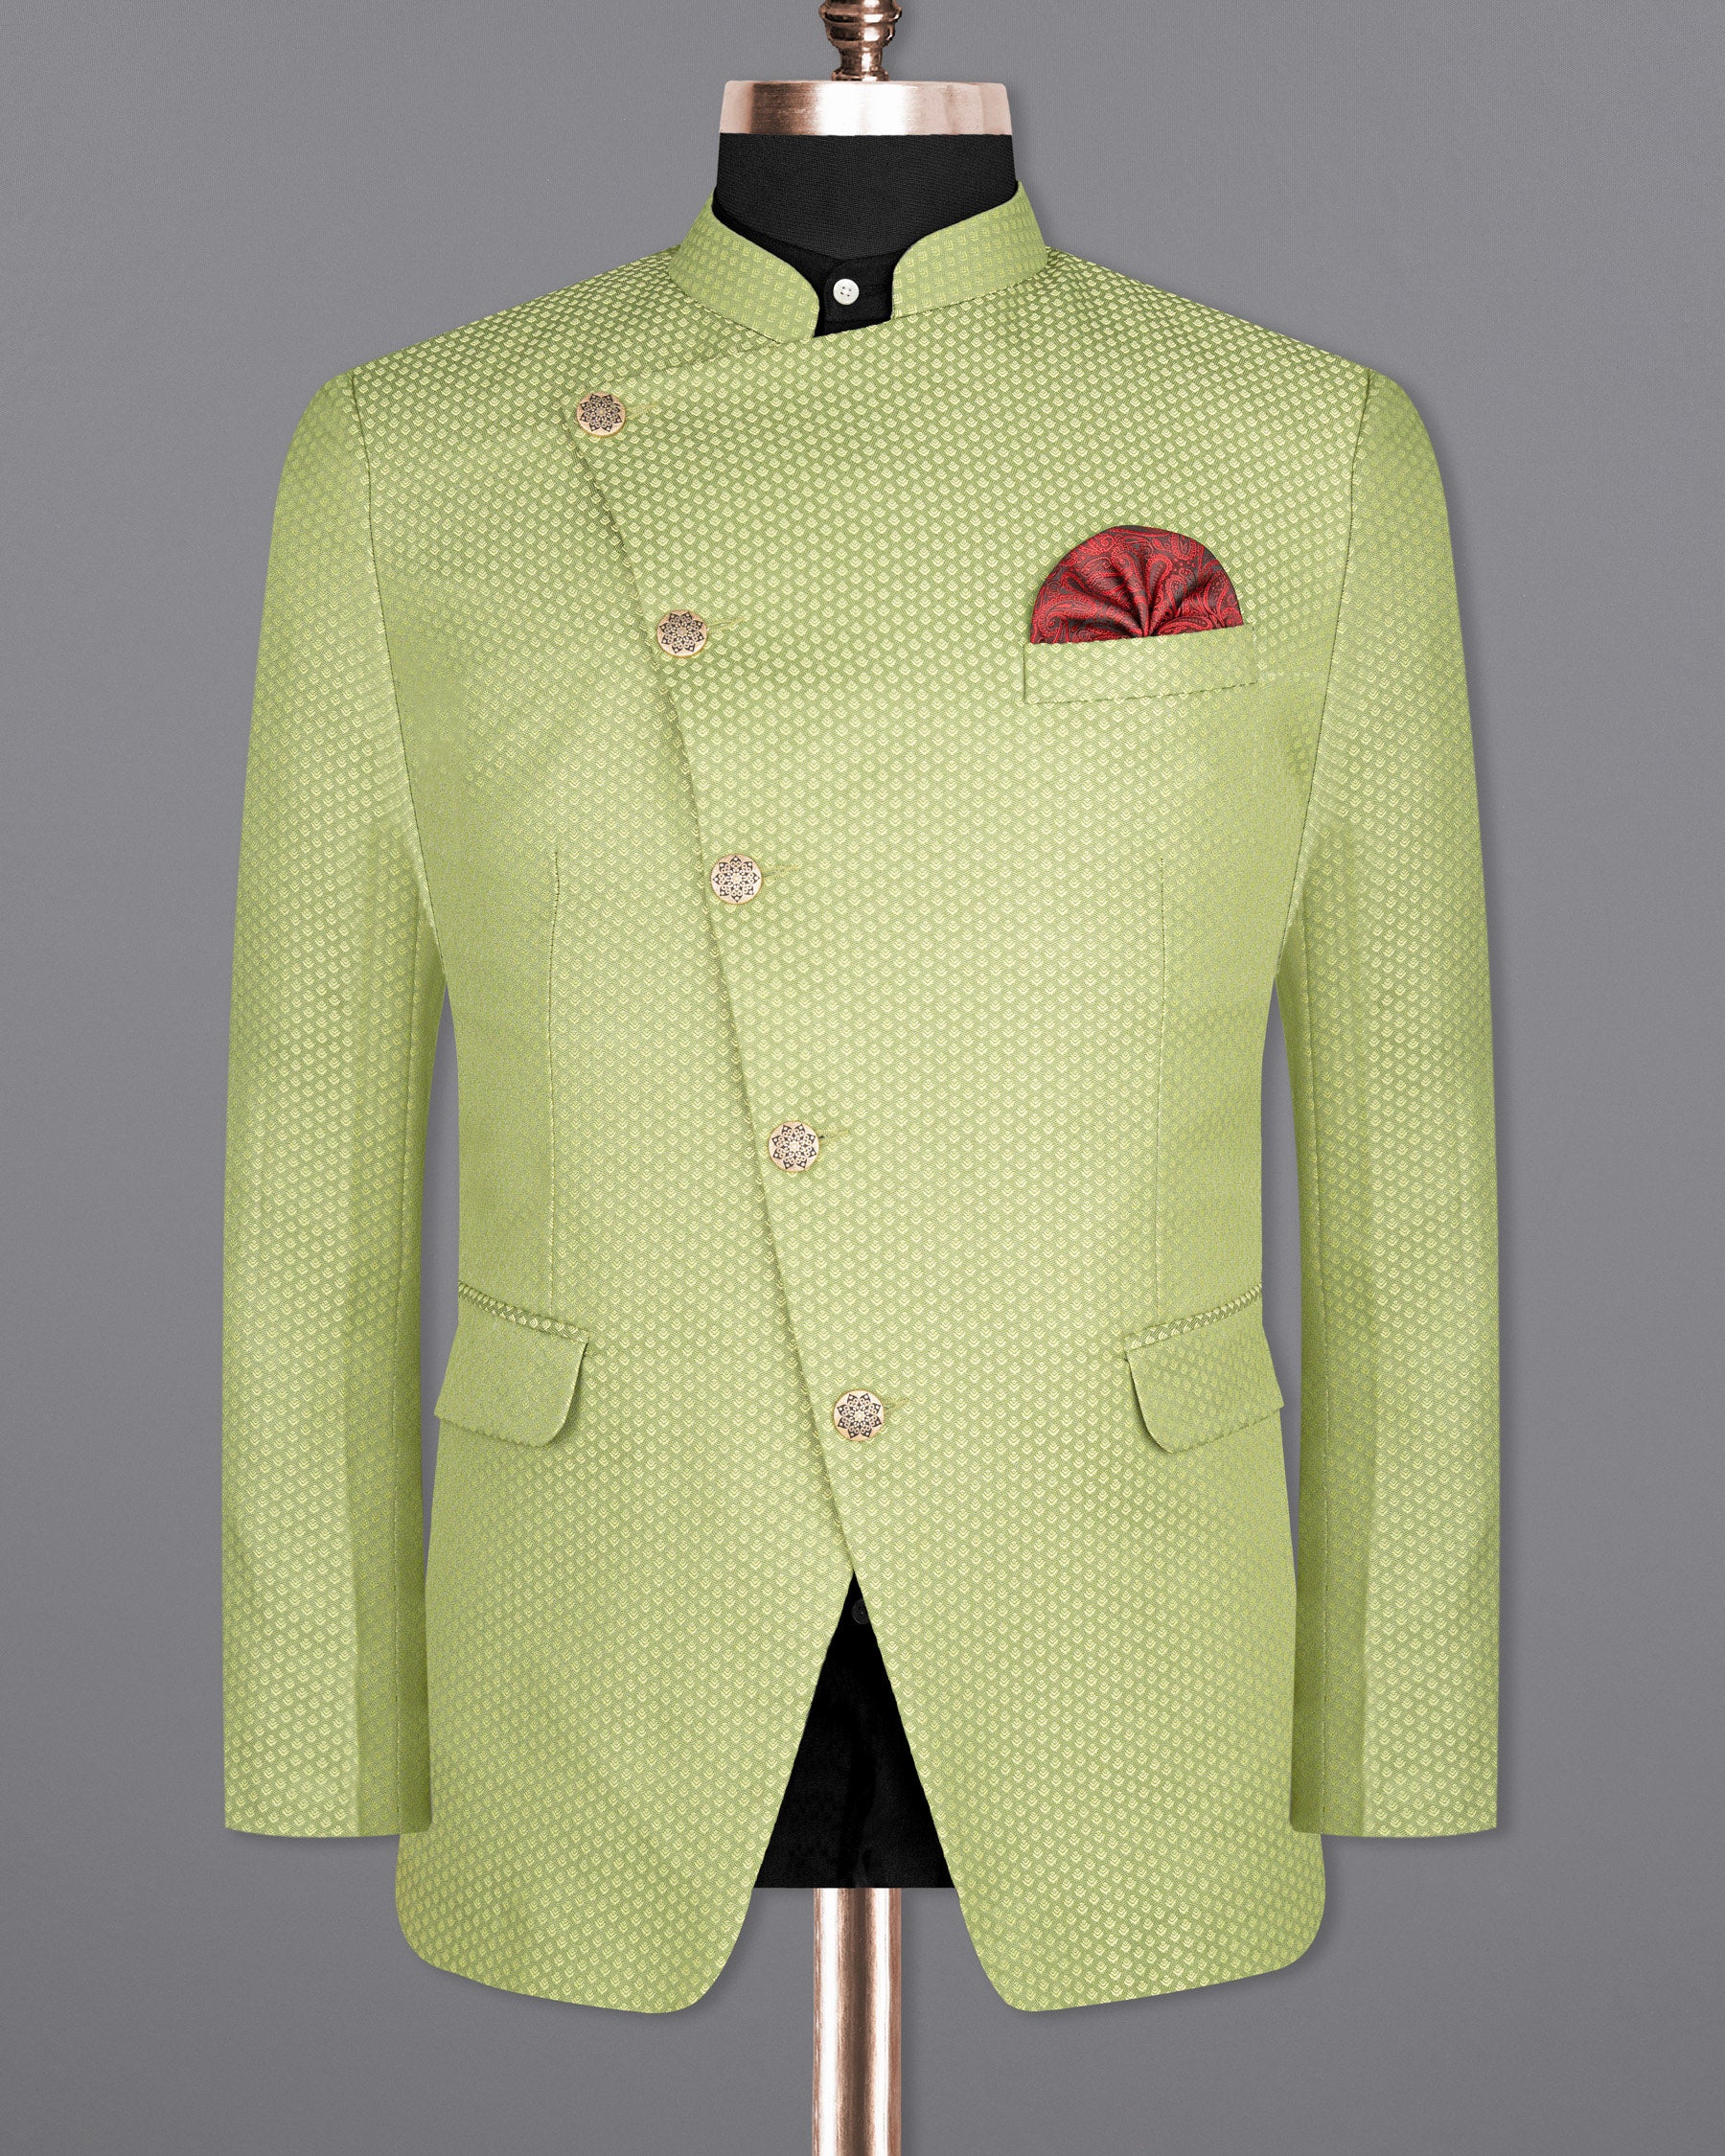 Olivine Green Cross Buttoned Bandhgala Designer Suit ST1674-CBG-38, ST1674-CBG-H-38, ST1674-CBG-39, ST1674-CBG-H-39, ST1674-CBG-40, ST1674-CBG-H-40, ST1674-CBG-42, ST1674-CBG-H-42, ST1674-CBG-44, ST1674-CBG-H-44, ST1674-CBG-46, ST1674-CBG-H-46, ST1674-CBG-48, ST1674-CBG-H-48, ST1674-CBG-50, ST1674-CBG-H-50, ST1674-CBG-52, ST1674-CBG-H-52